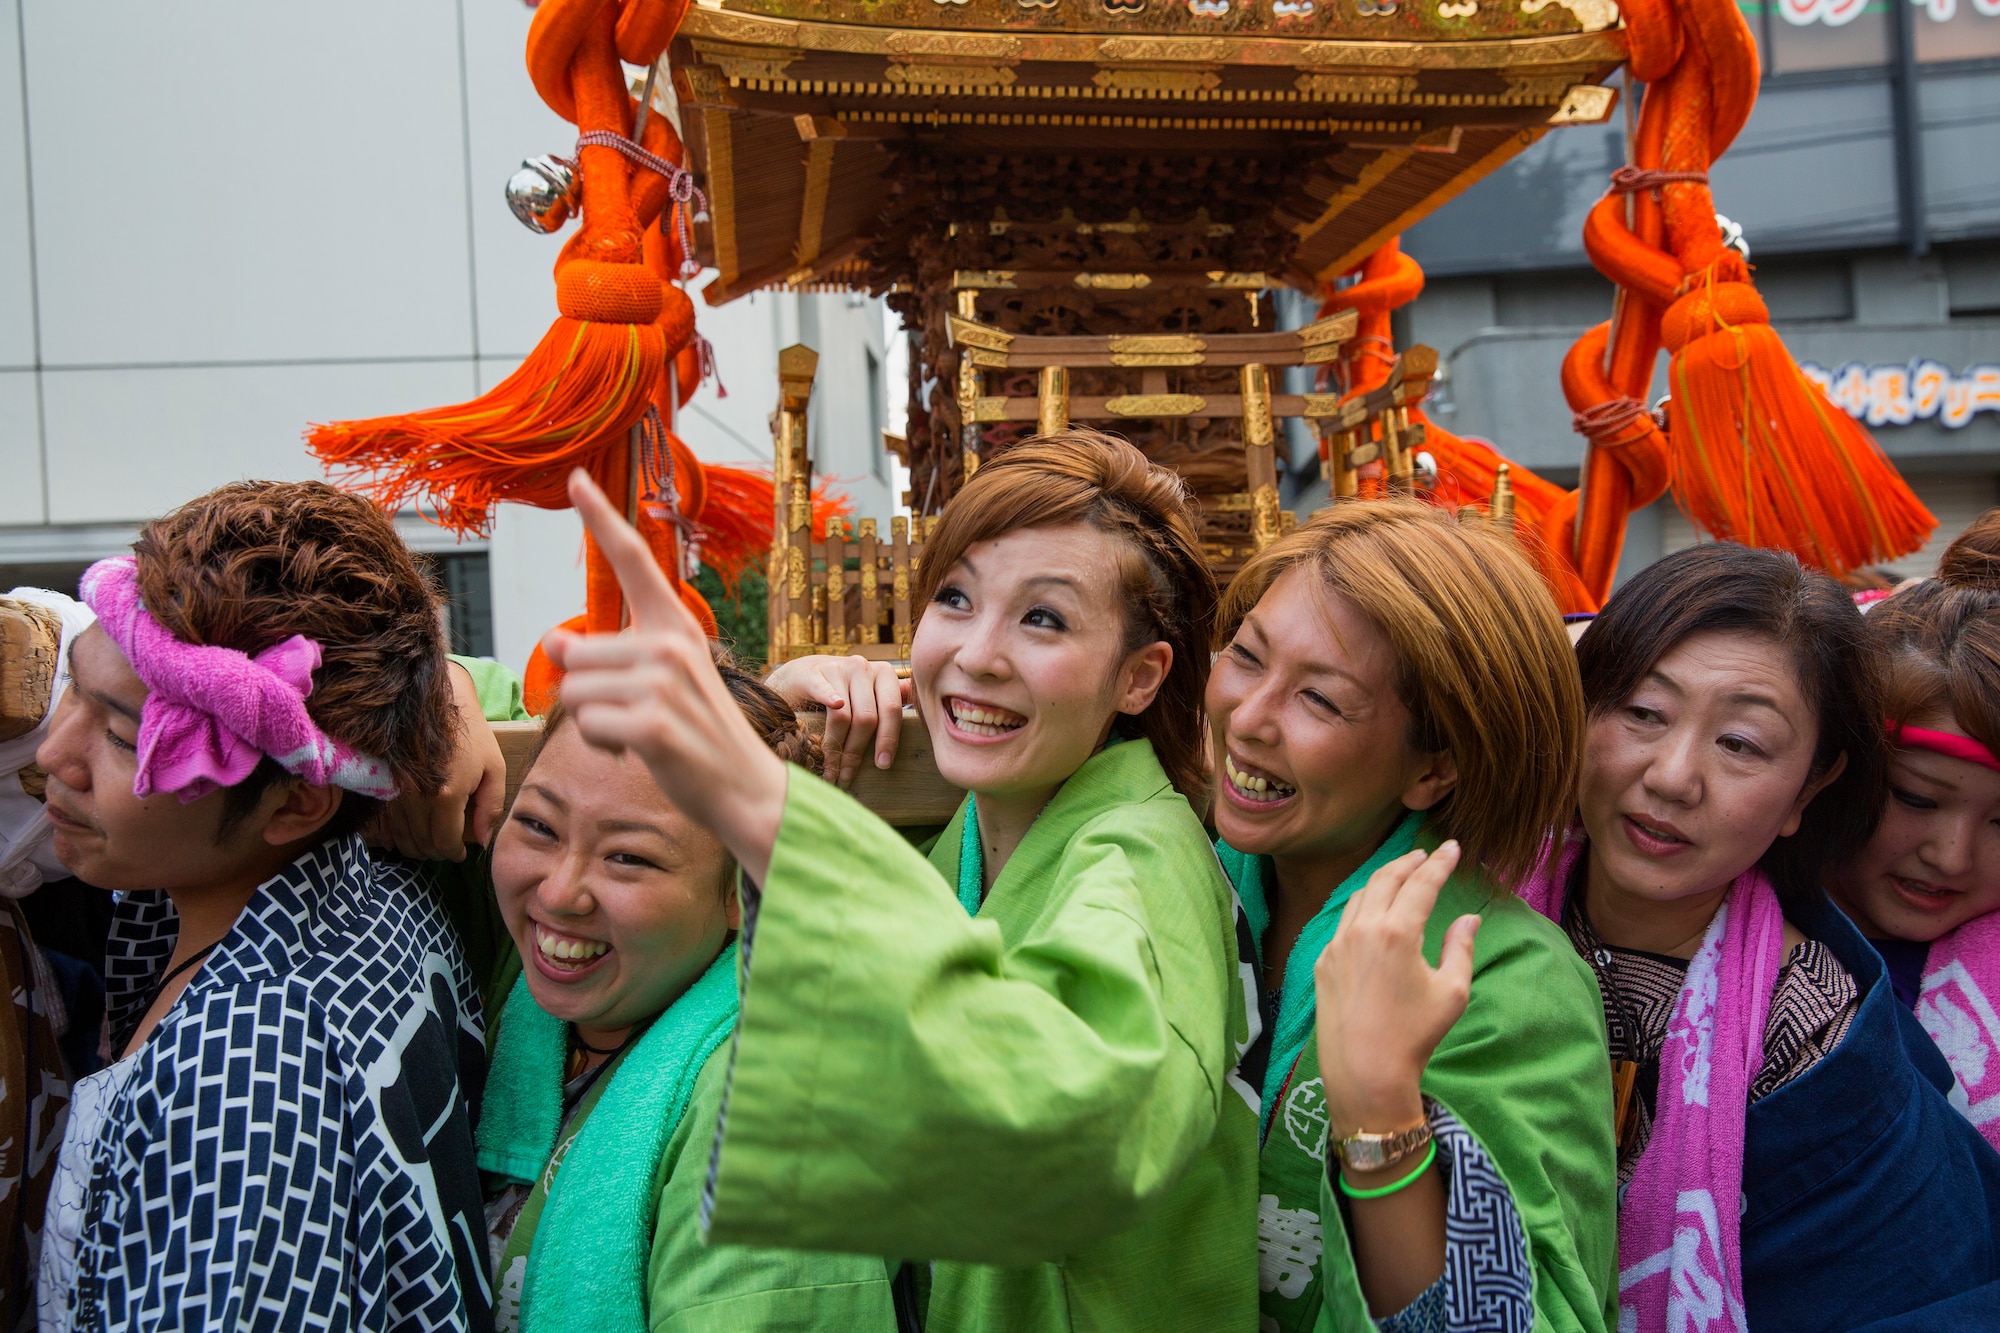 Mikoshi shrine carriers hoist their shrine with their kids at Fussa city, Japan, Aug. 8, 2014. Multiple shrines were carried from the Fussa shinmei-sha, shinto shrine, to City Hall during the 64th annual Fussa Tanabata Festival. (U.S. Air Force photo by Osakabe Yasuo/Released)